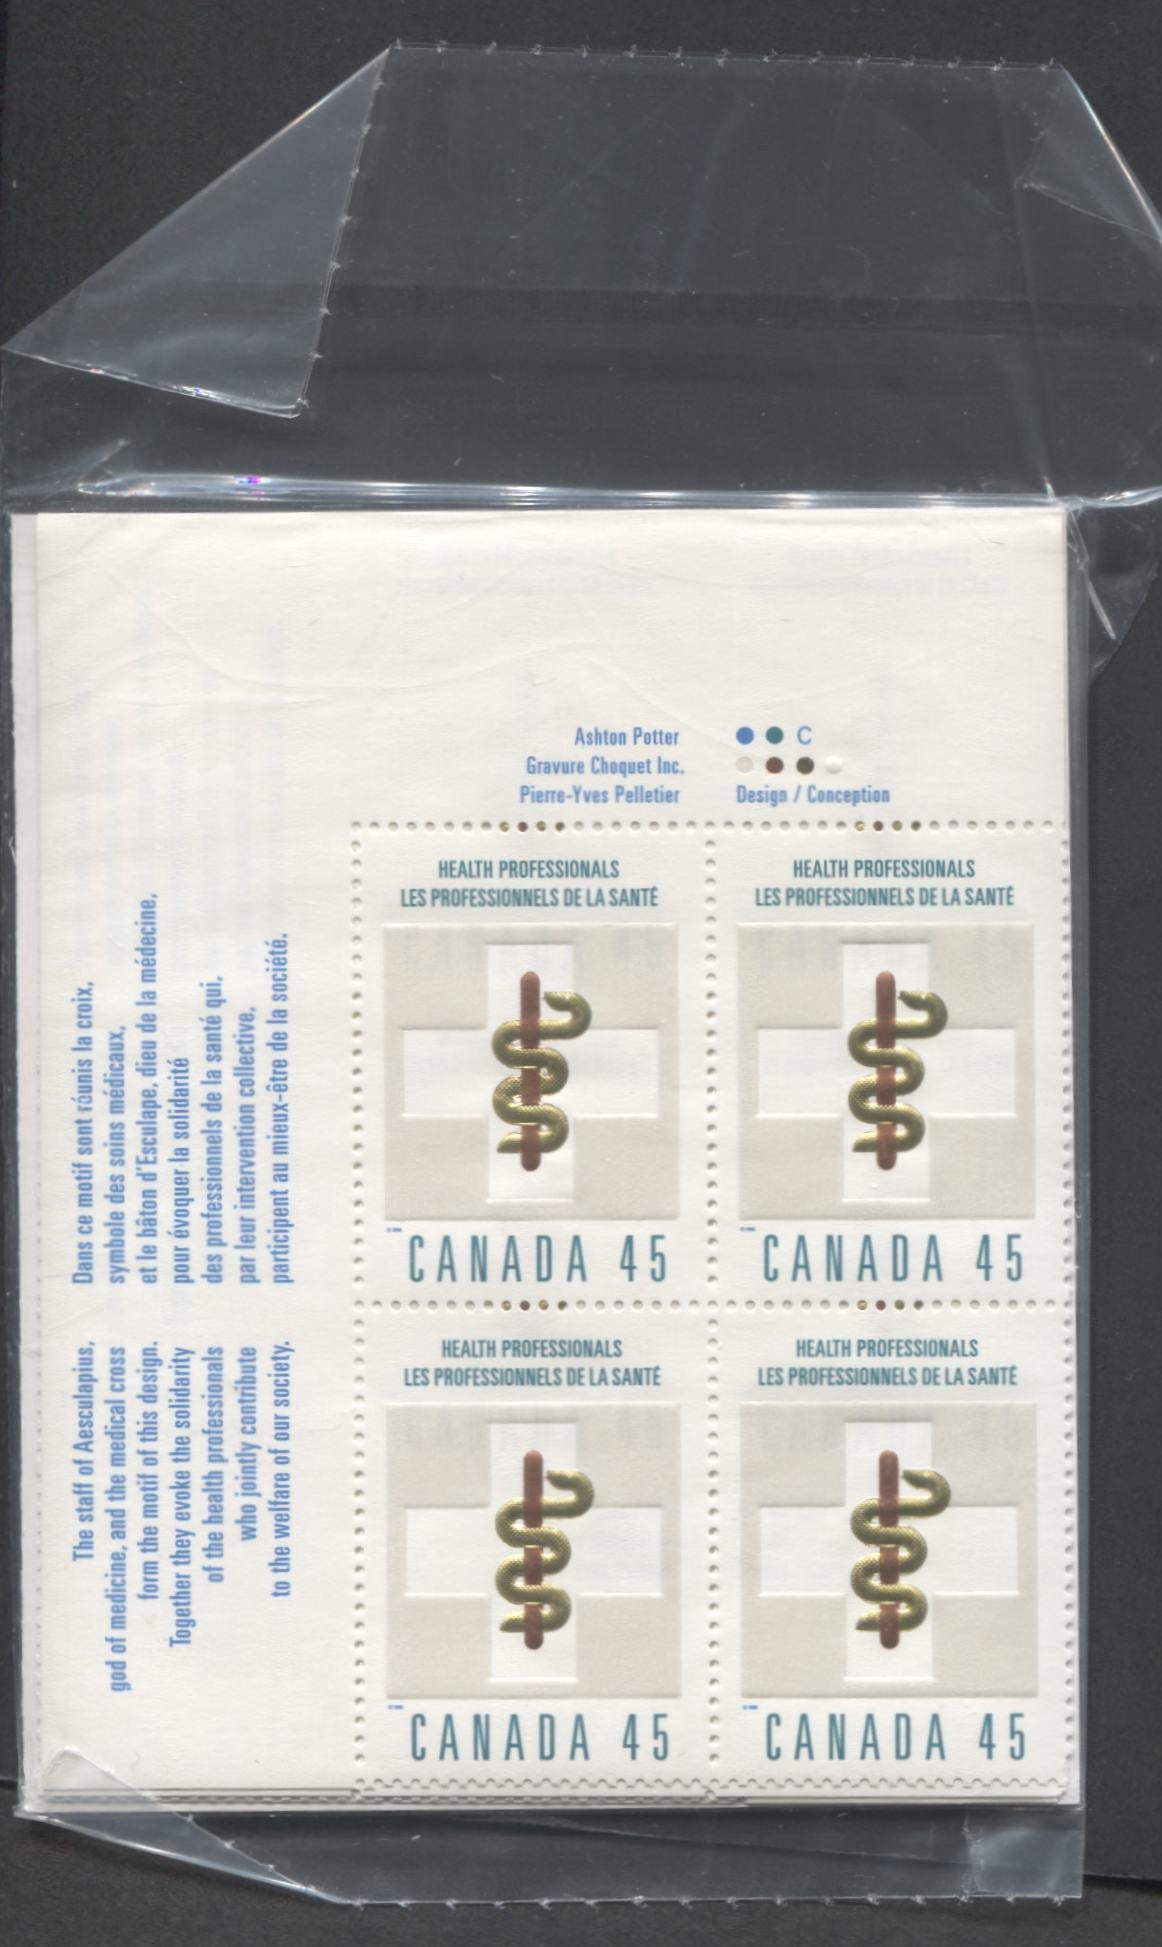 Lot 338 Canada #1735 45c Multicolored Aesculapian Staff & Cr 1998 Health Professionals, Canada Post Sealed Pack of Inscription Blocks on Normal Tagging, TRC Paper With HB Type 7A Insert Card, VFNH, Unitrade Cat. $60